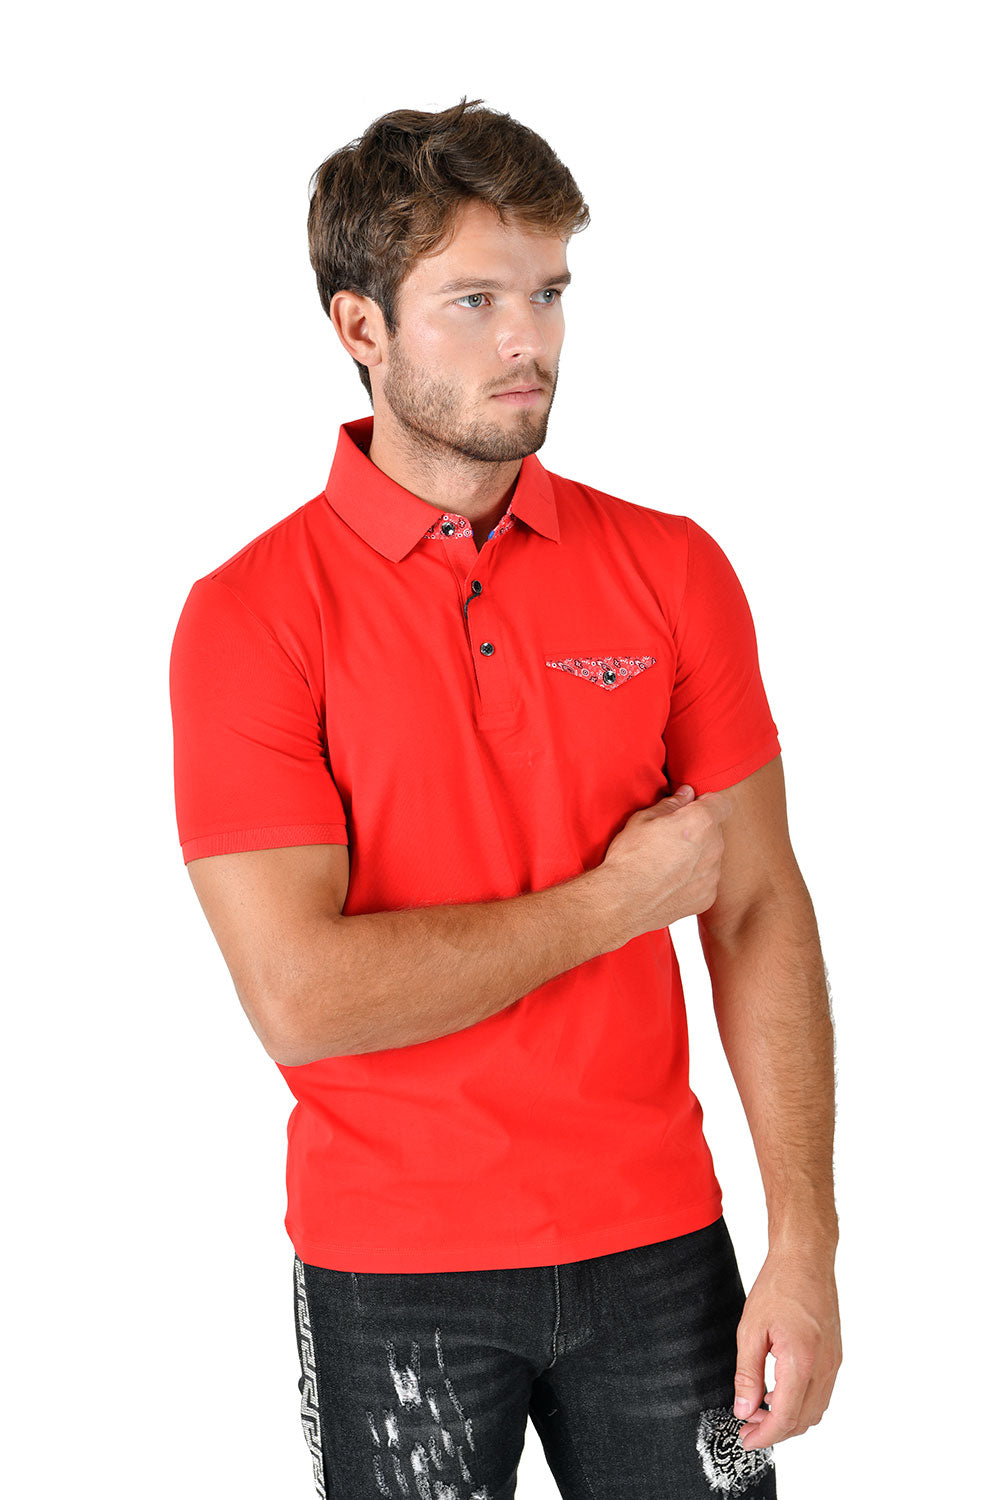 Men's solid color basic essential short sleeve polo shirts PP823